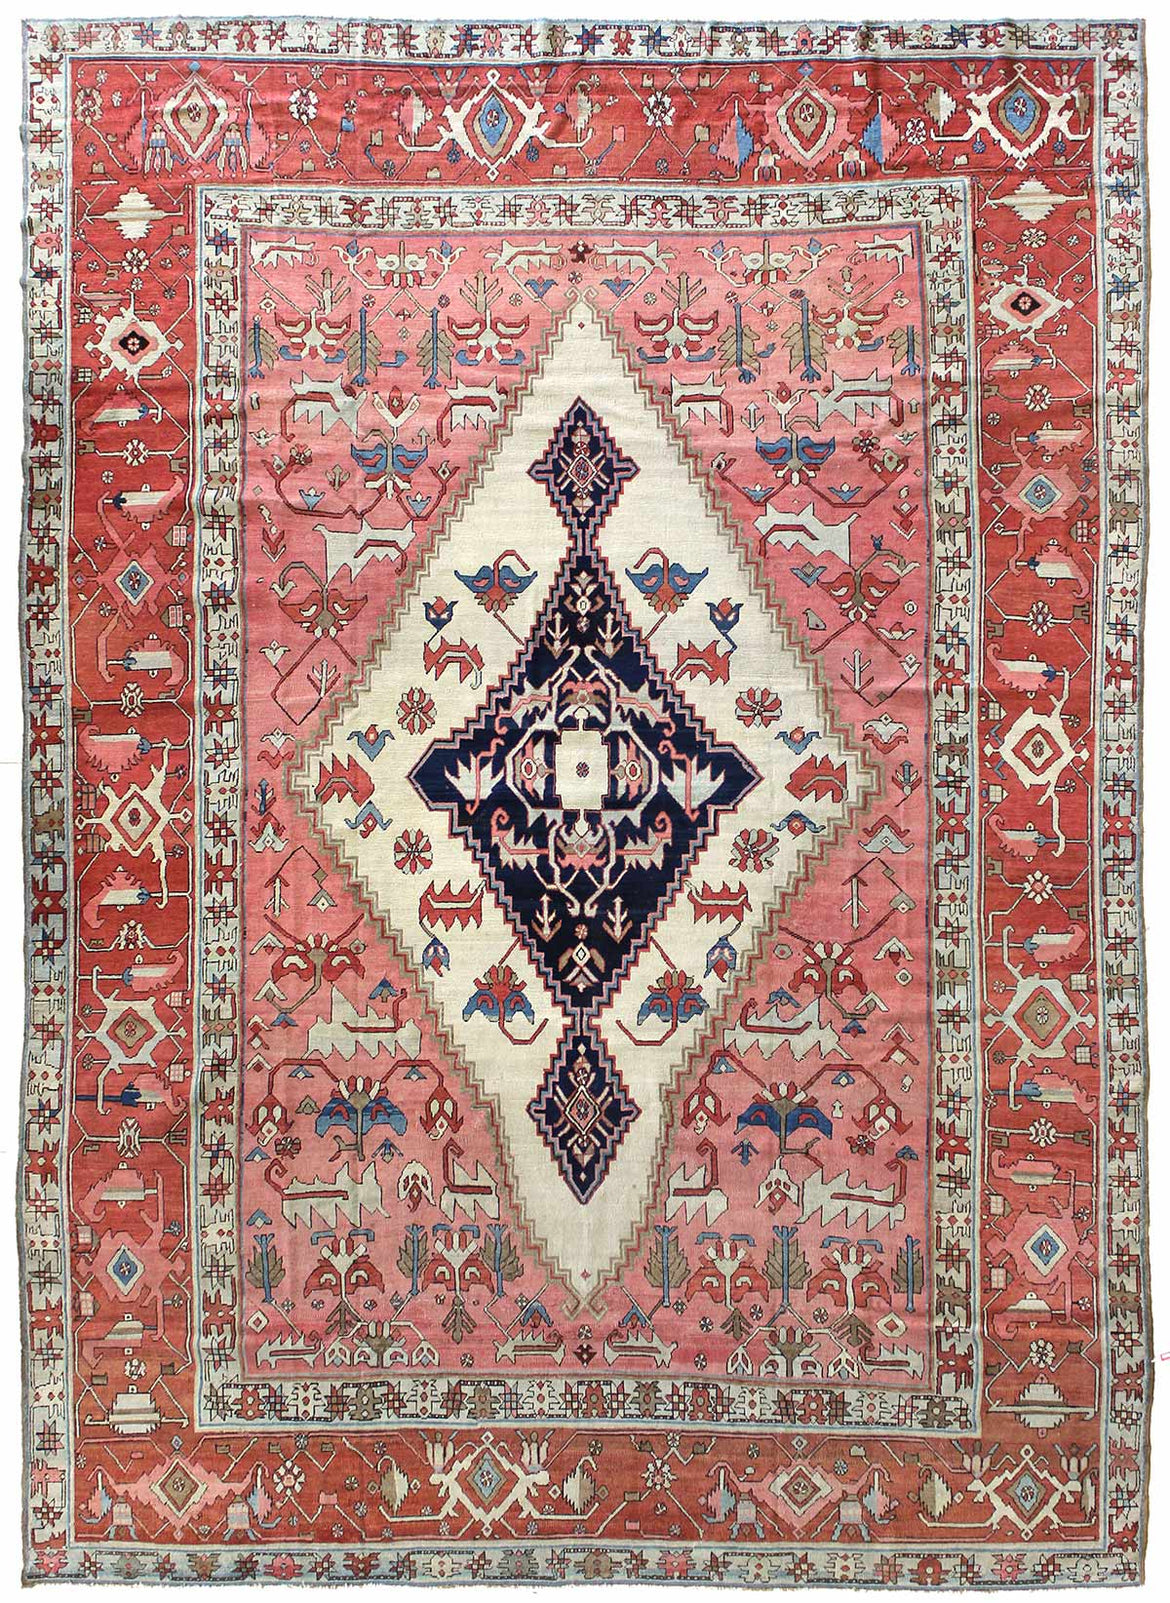 Antique Rug of the Month: April